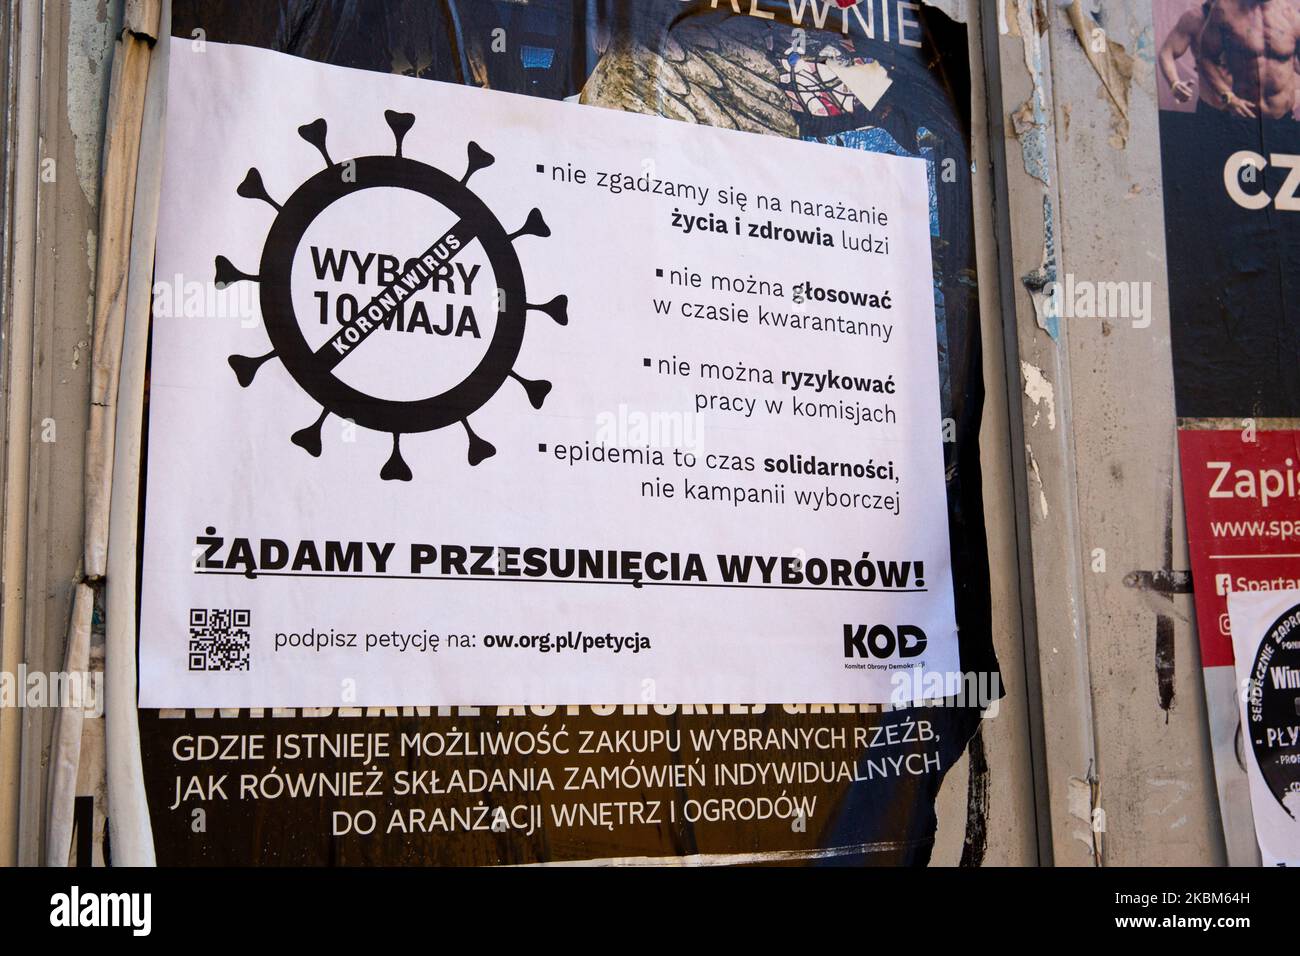 A poster of KOD - opposition organisation in Poland depending a postponement of presidential election which are set to take place on May 10, despite Coronavirus pandemic growth, Krakow Poland, April 8, 2020. Ruling party - Prawo i Sprawiedliwosc - push to hold the presidential elections on 10 of May as they hope their candidate can get better support. Opposition wants to postpone the election because - in their view - in the time of epidemic it is not safe for the public, and it doesn't give all candidates equal chance to run their campaigns. (Photo by Dominika Zarzycka/NurPhoto) Stock Photo